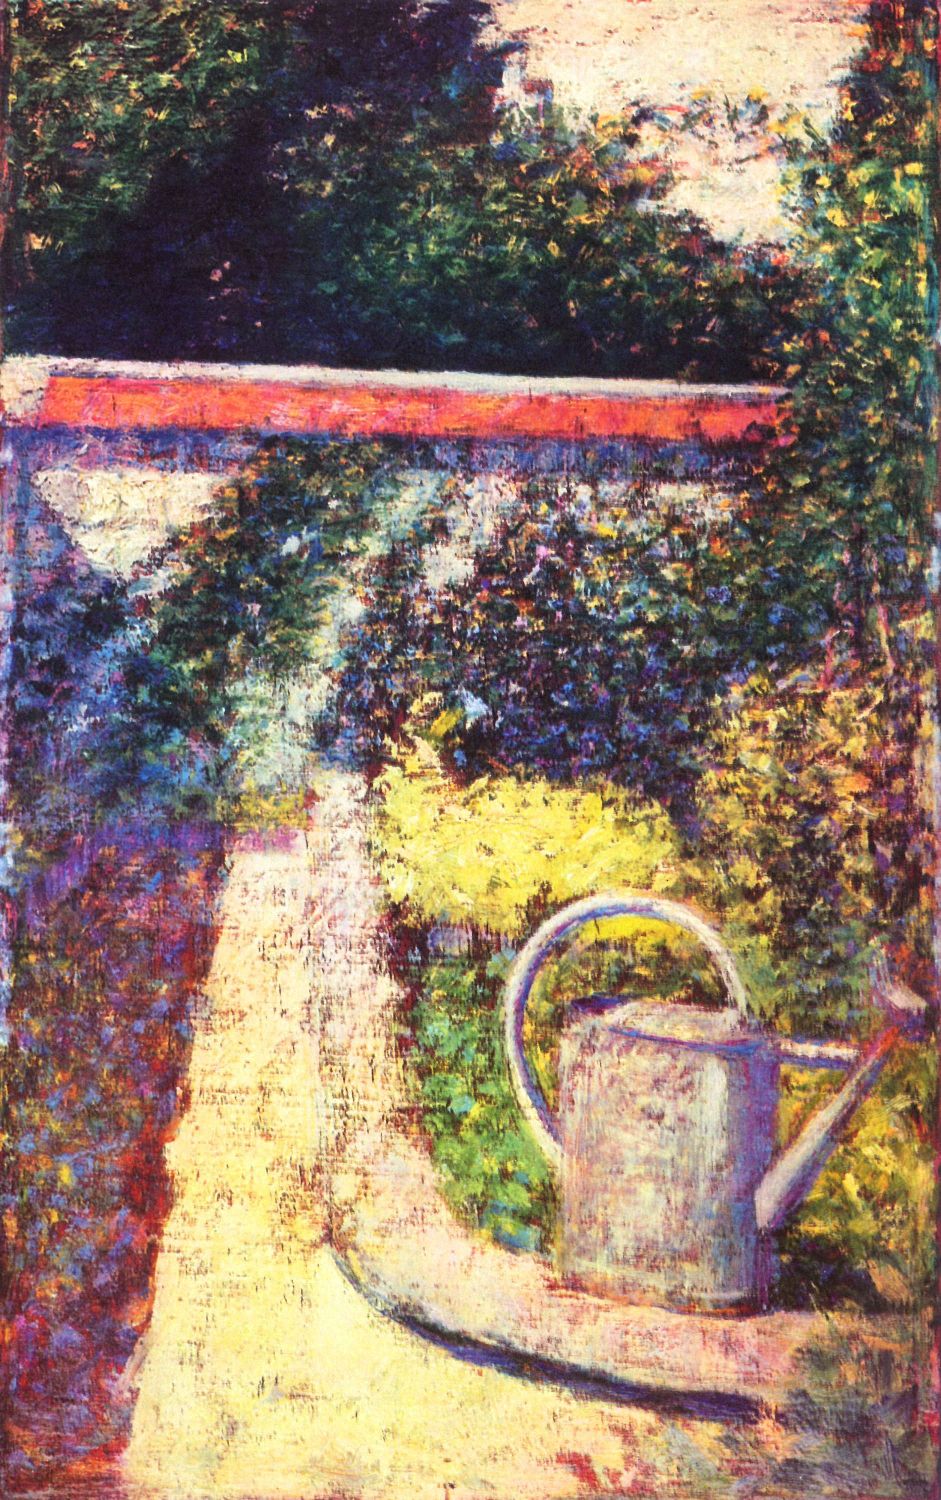 Seurat - The Watering Can by Seurat